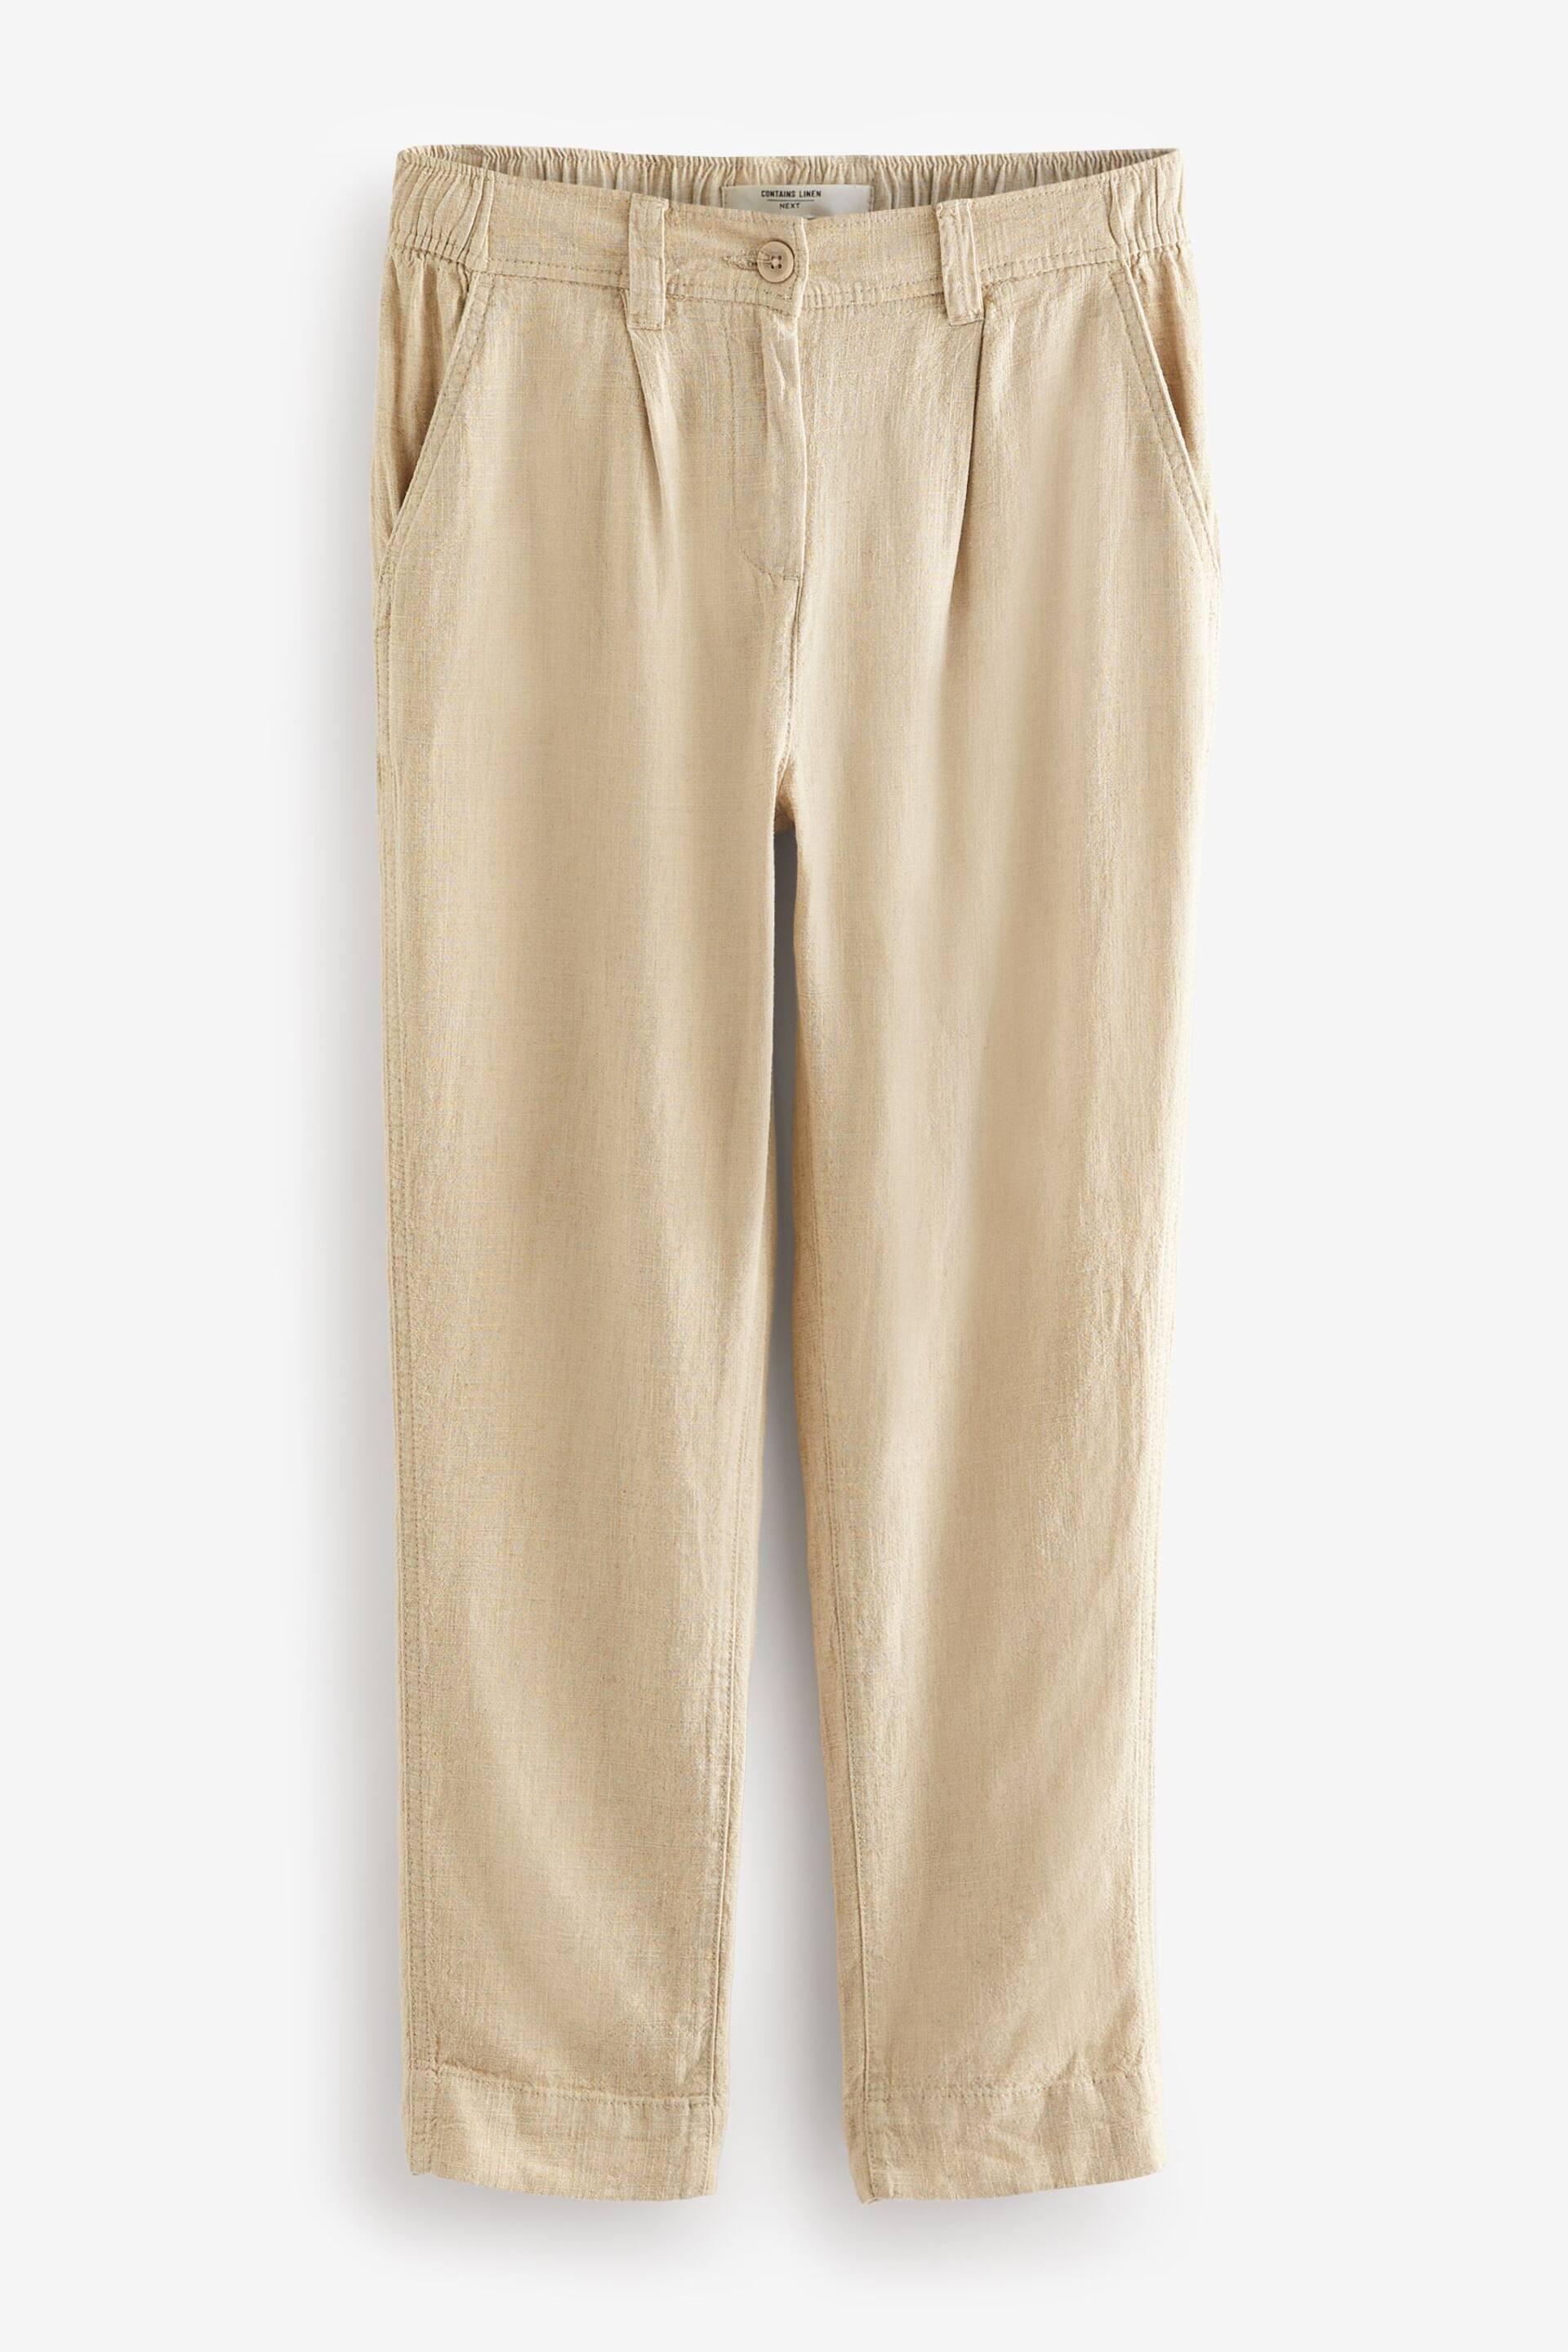 Natural Linen Blend Taper Trousers - Image 5 of 6